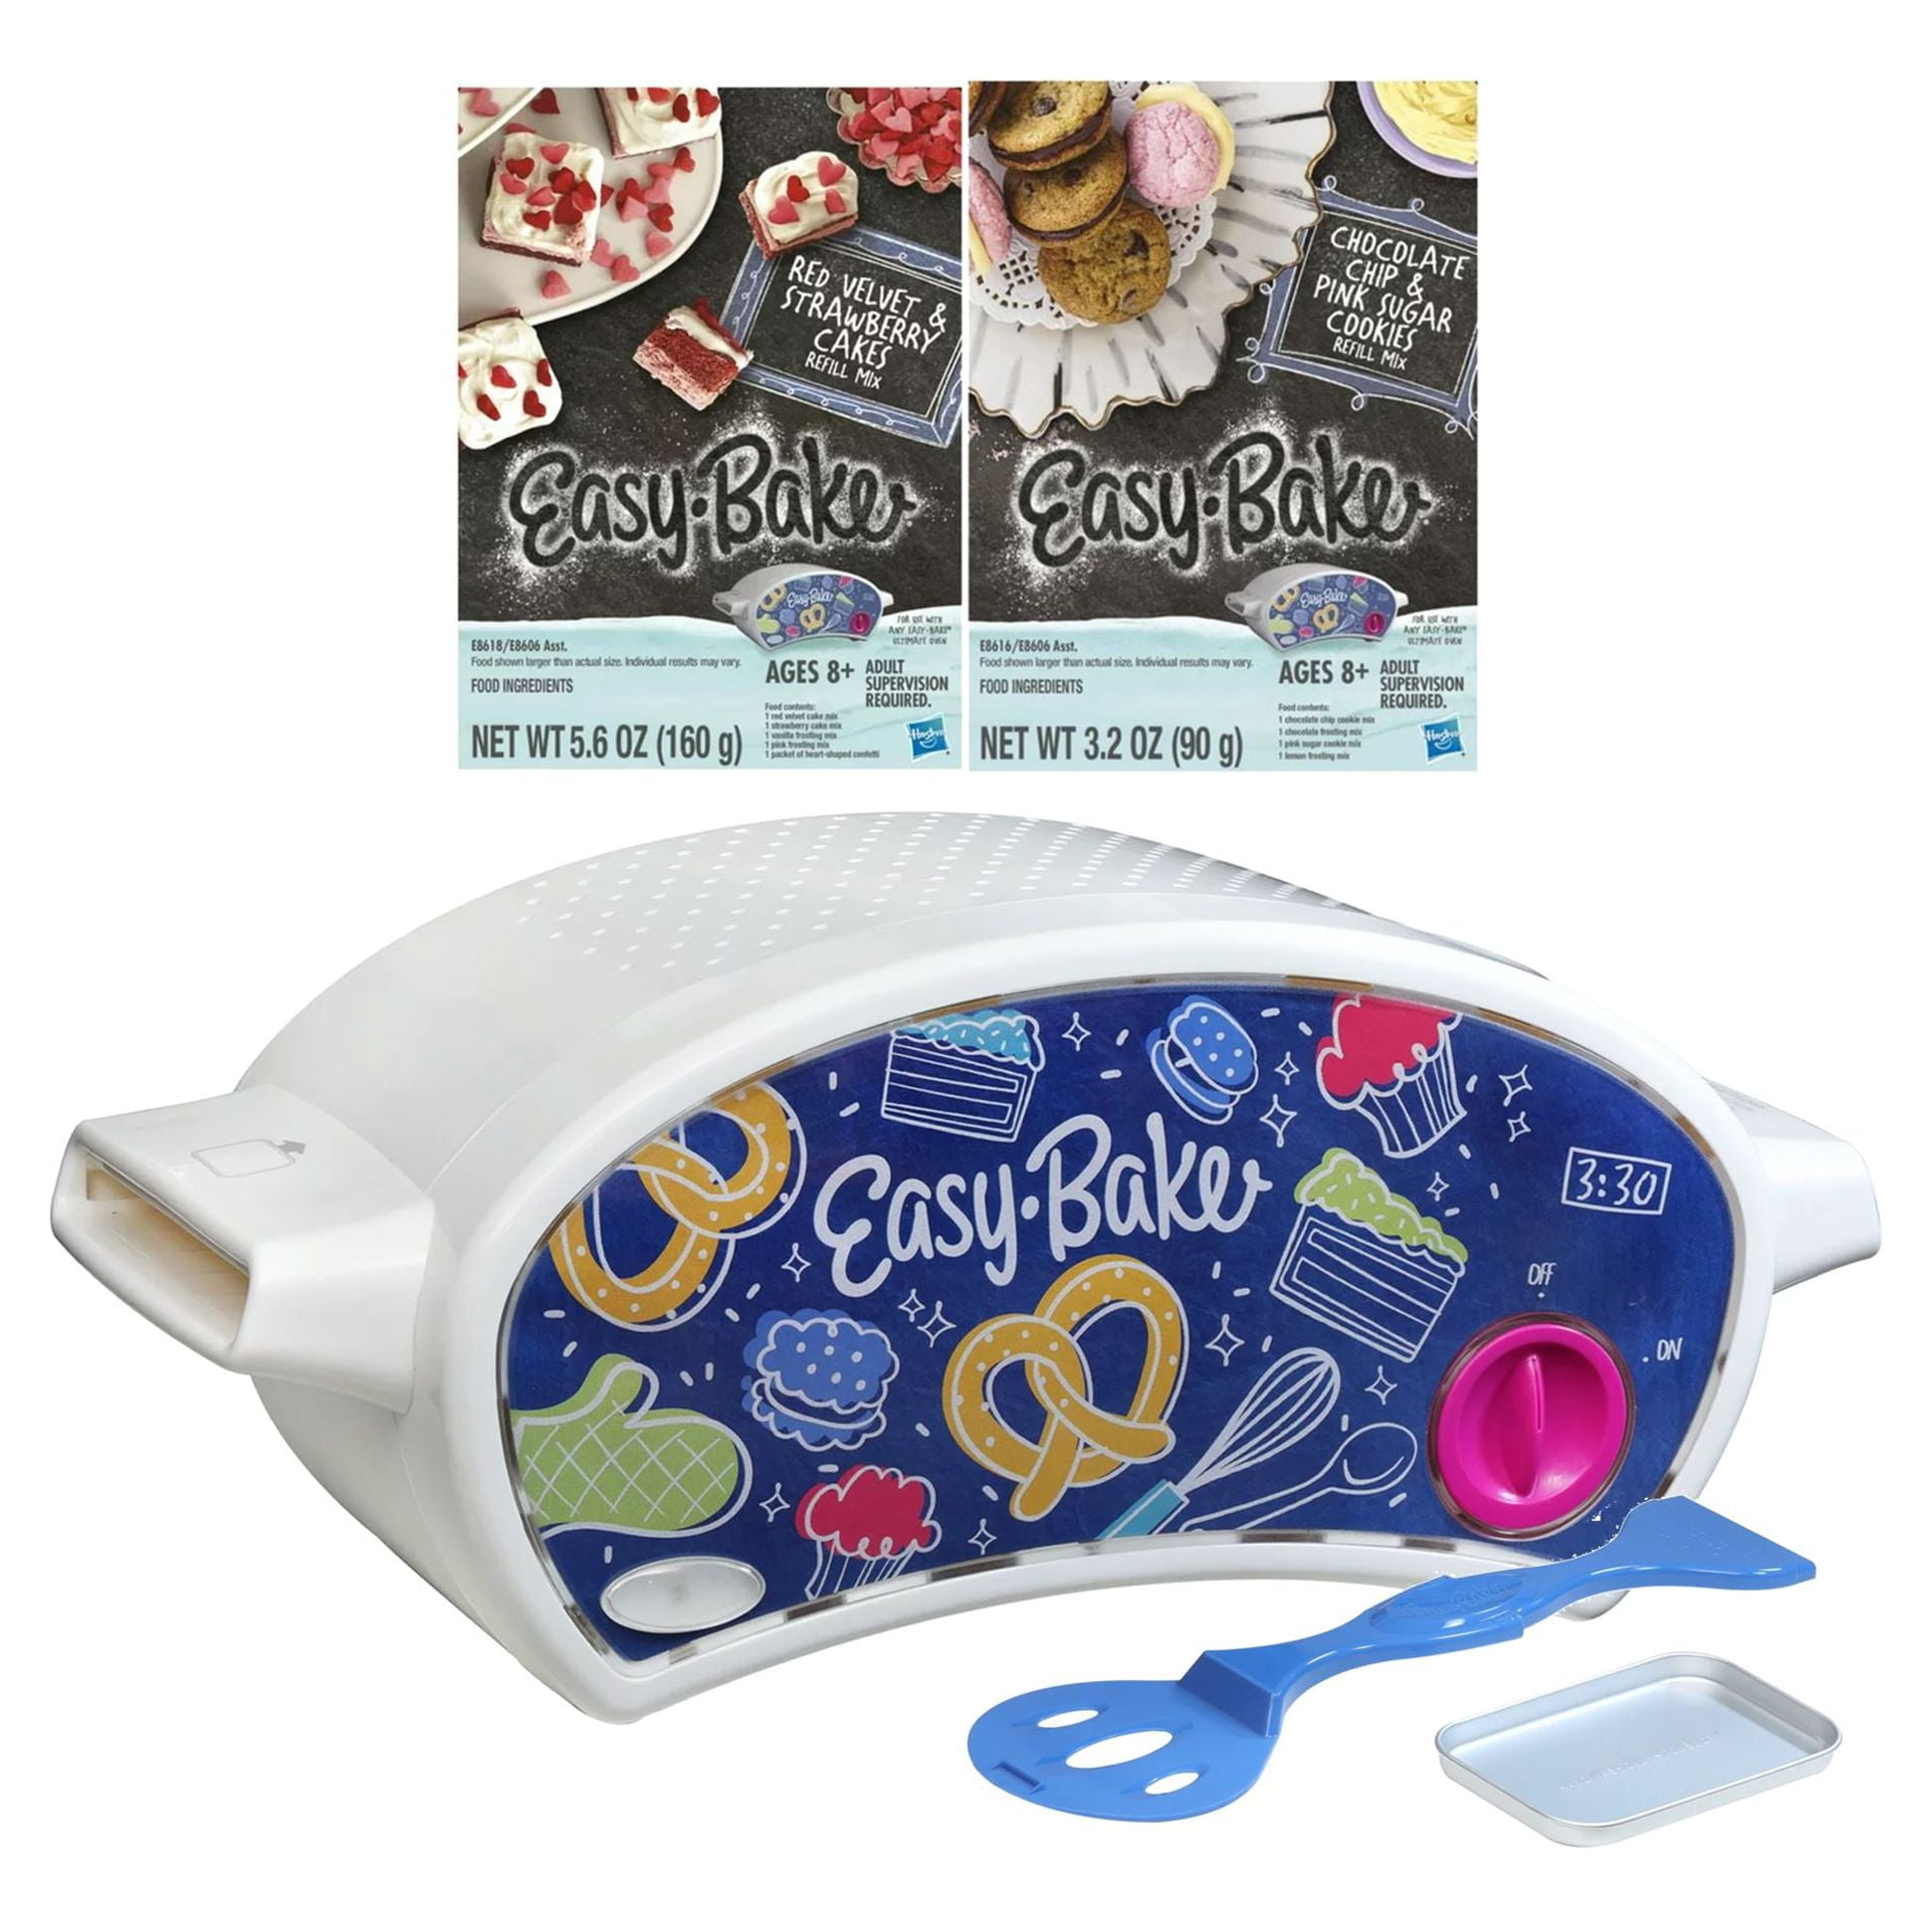 Easy Bake Oven Star Edition + Red Velvet Cupcakes + Chocolate Chip and Sugar Cookies Refill Setl. Set of 3 Items